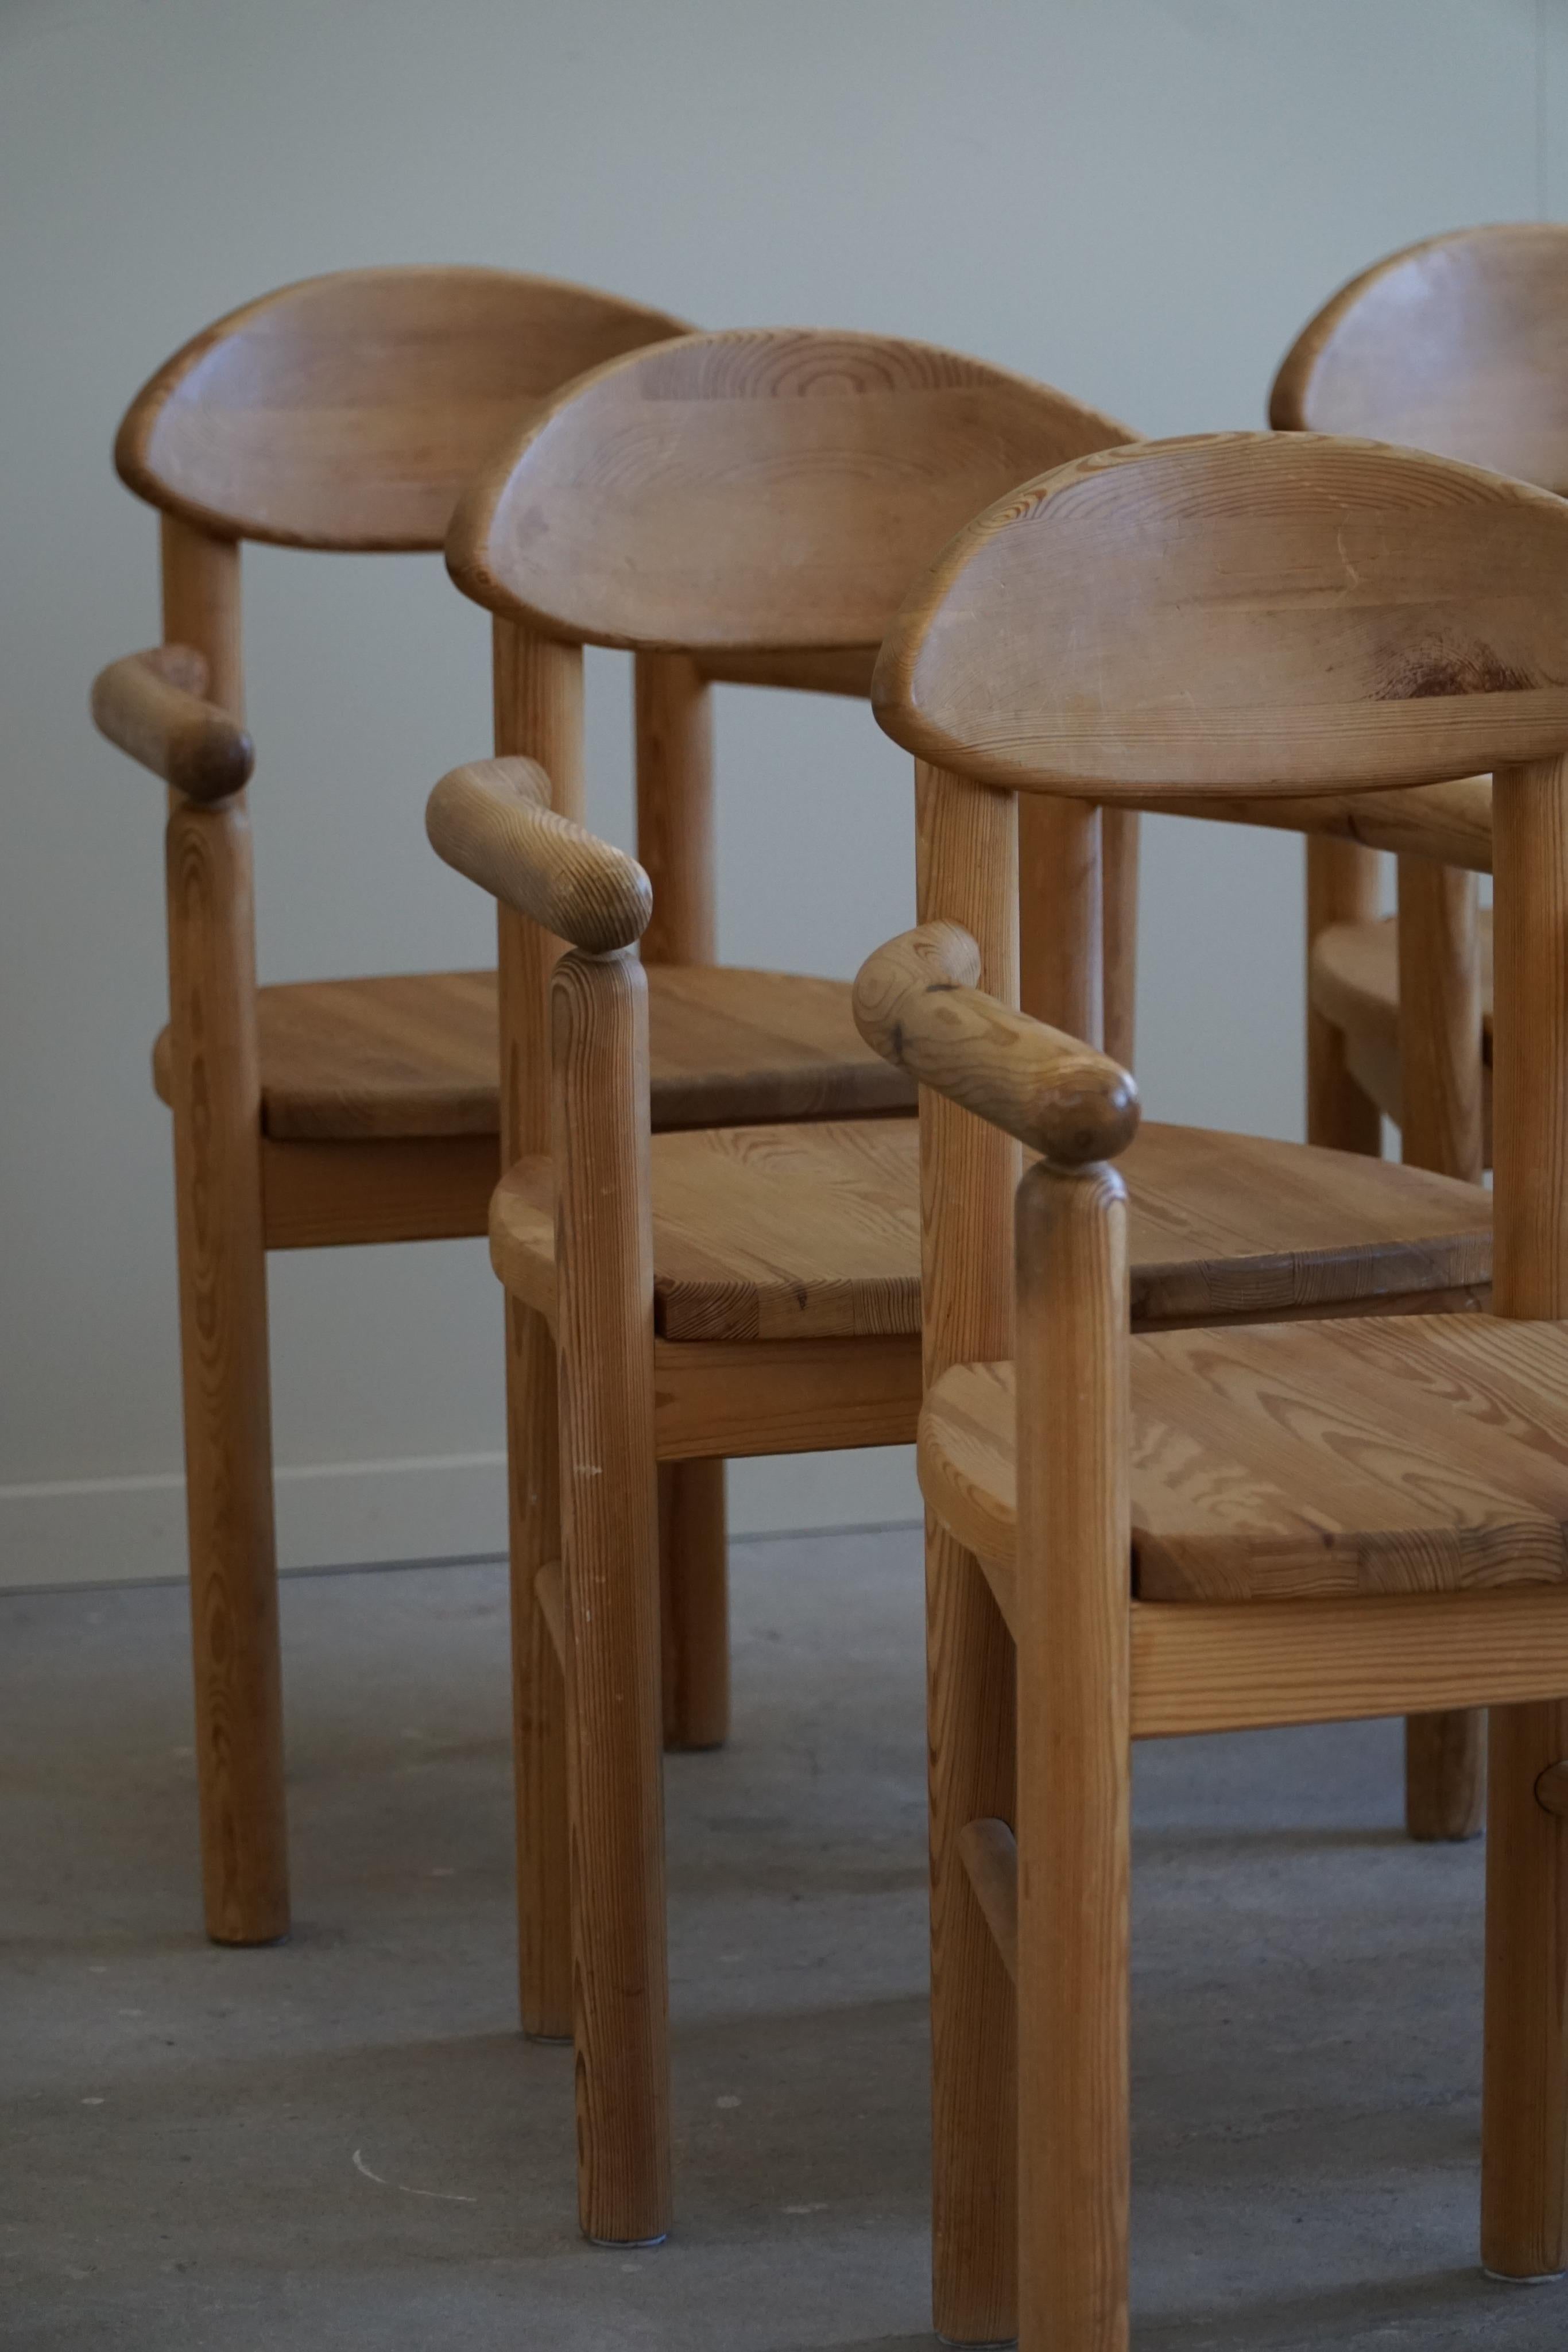 Set of 6 Dining Chairs in Solid Pine, Rainer Daumiller, Danish Modern, 1970s For Sale 5